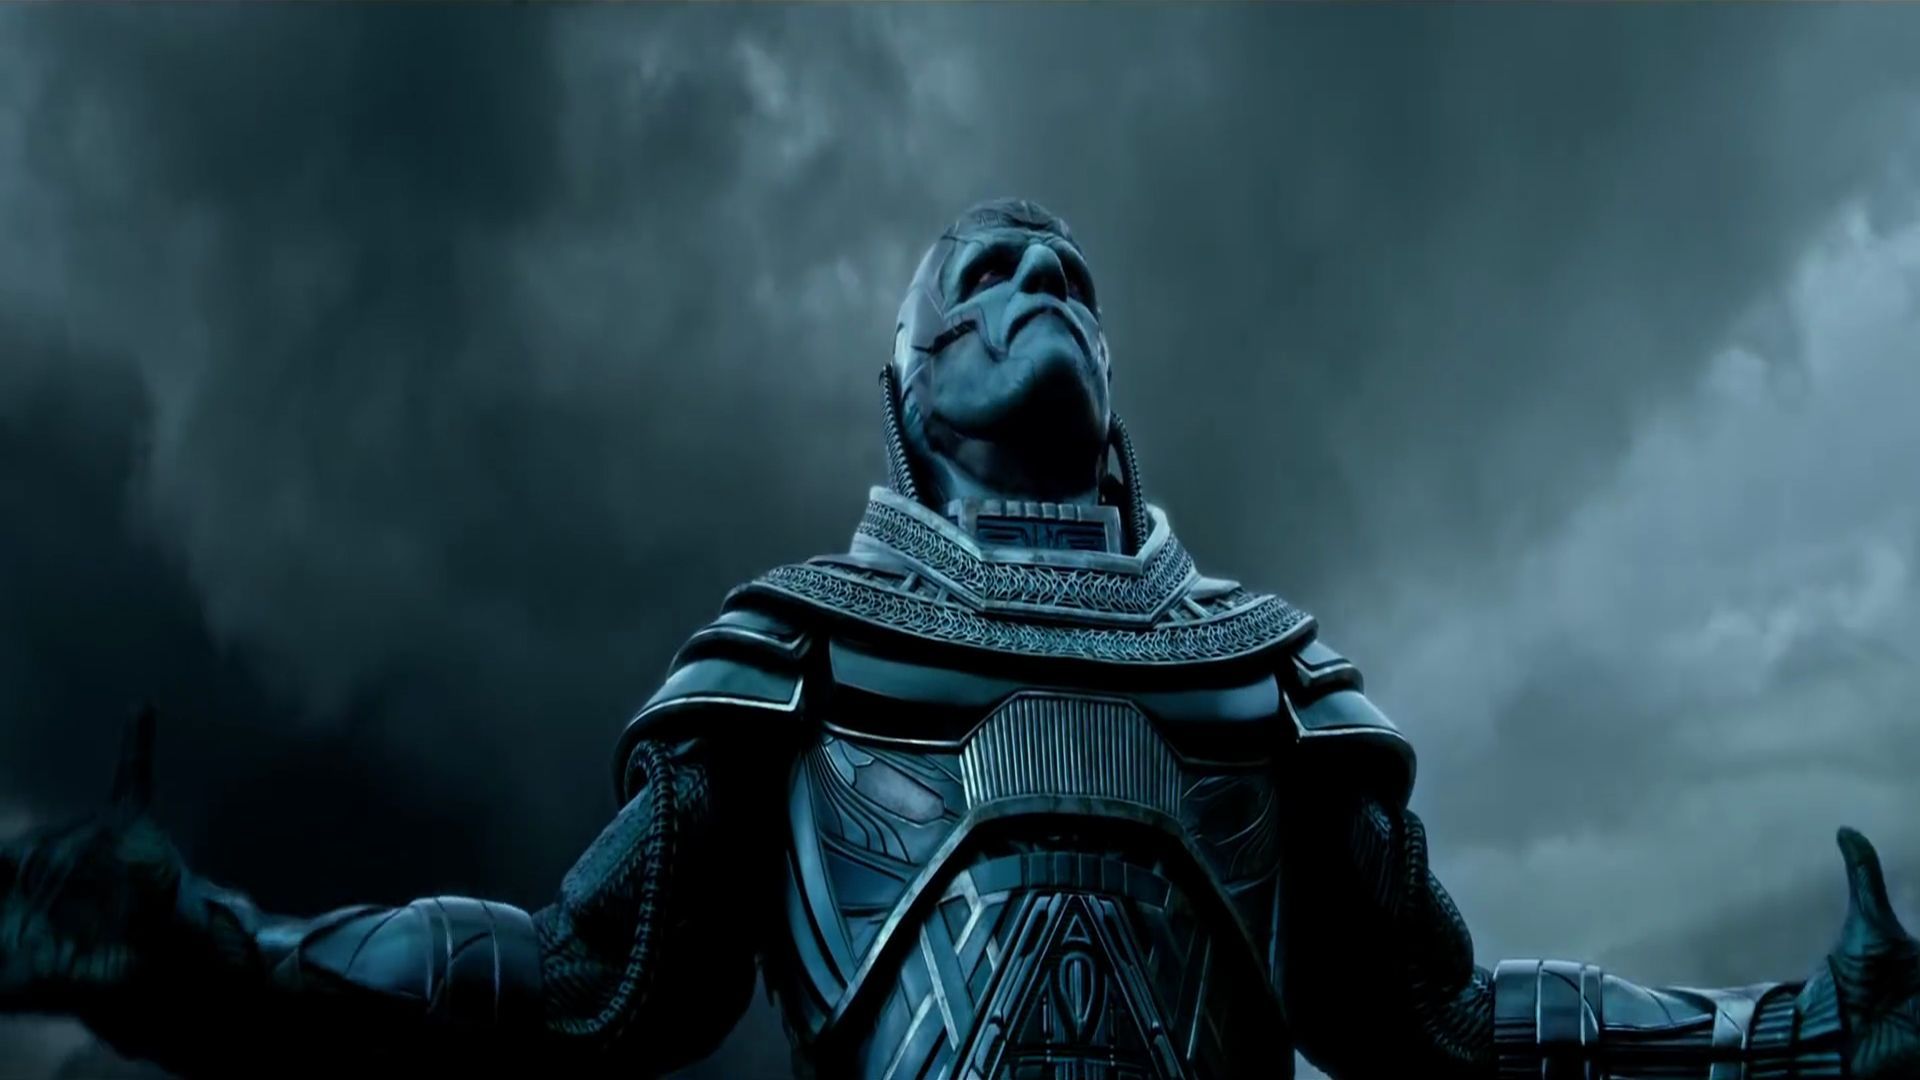 HD Wallpapers of X Men Apocalypse Hollywood Film Image Download